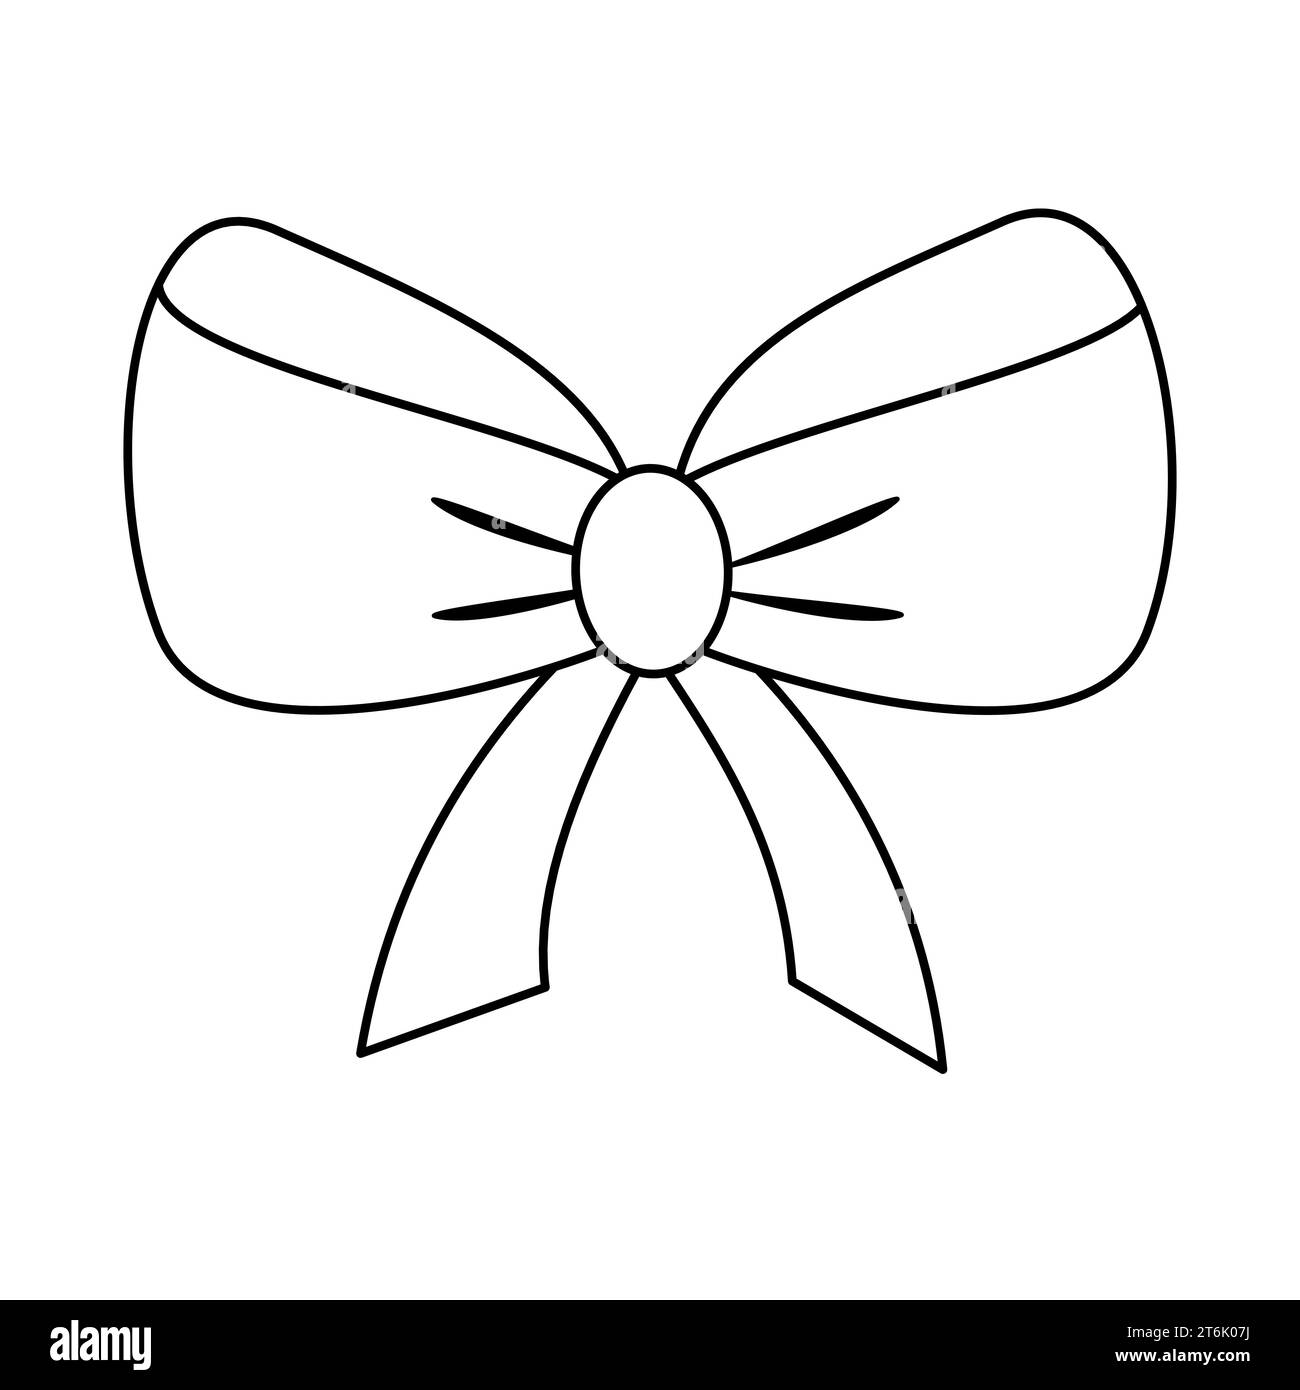 Decorative gift bow, doodle style flat vector outline illustration for kids coloring book Stock Vector